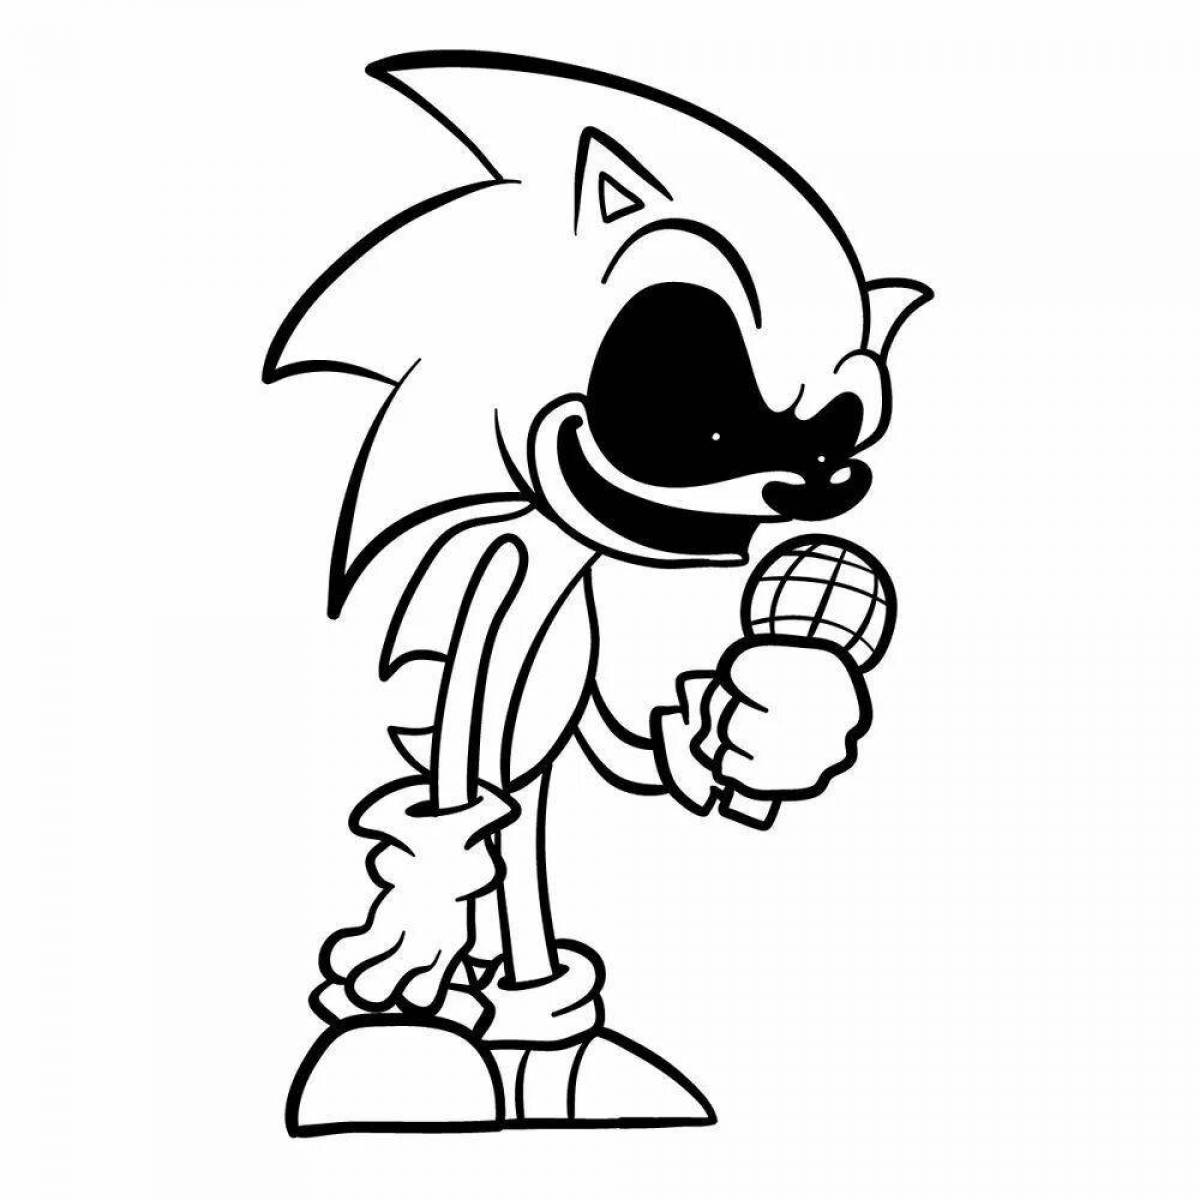 Sonicexe live coloring